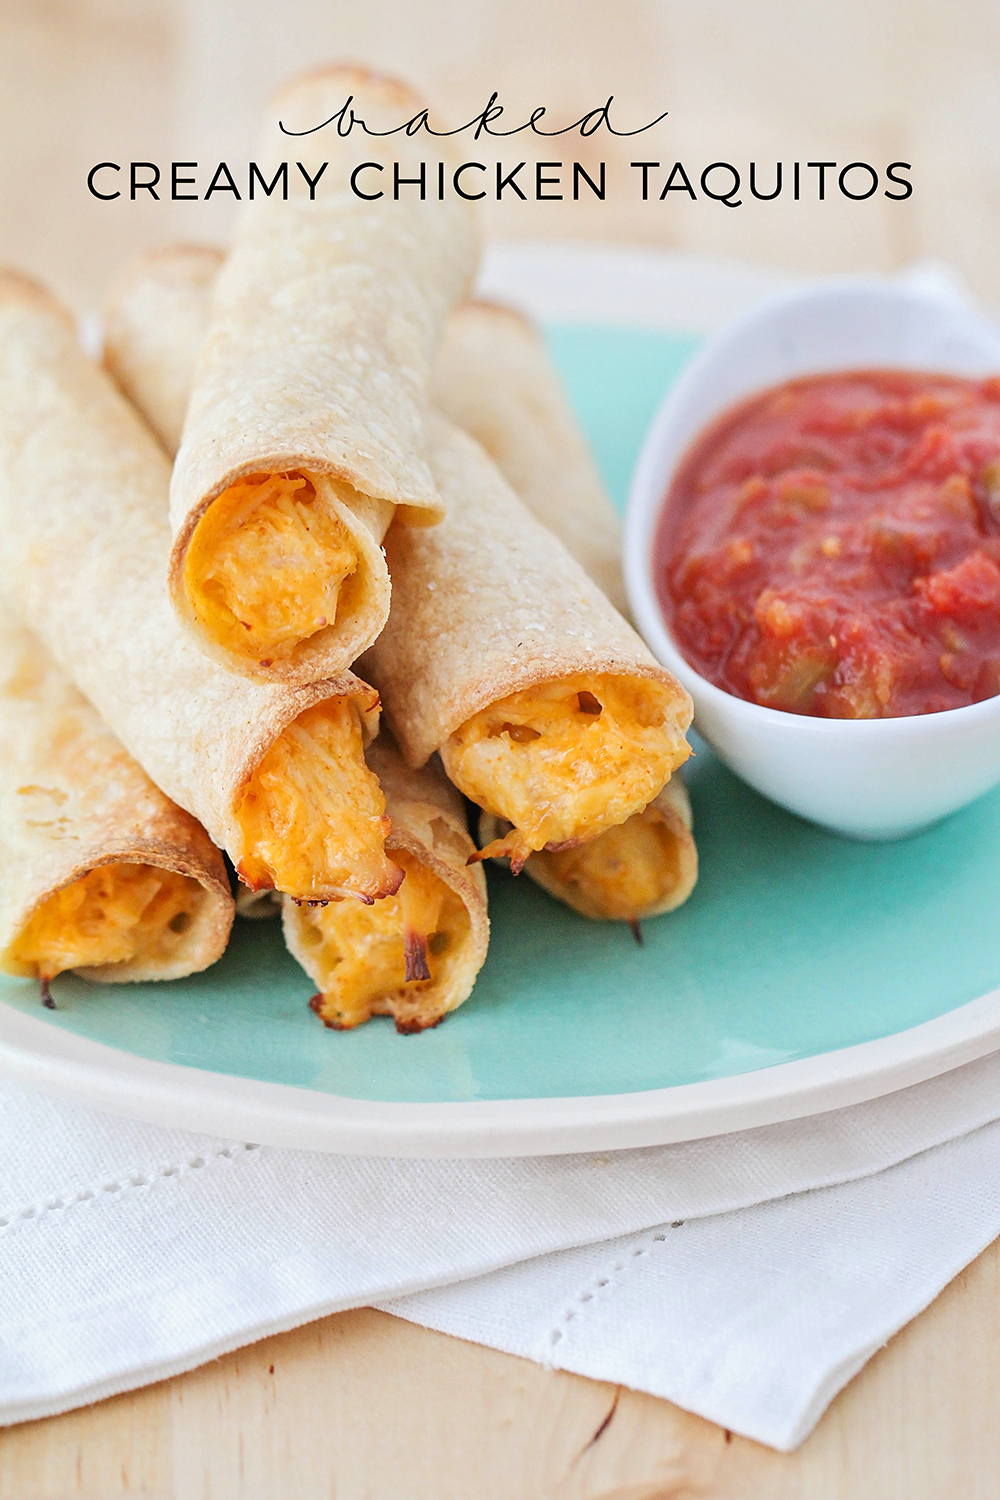 These simple and delicious baked creamy chicken taquitos take just a few minutes to make, and are the perfect quick lunch or snack!